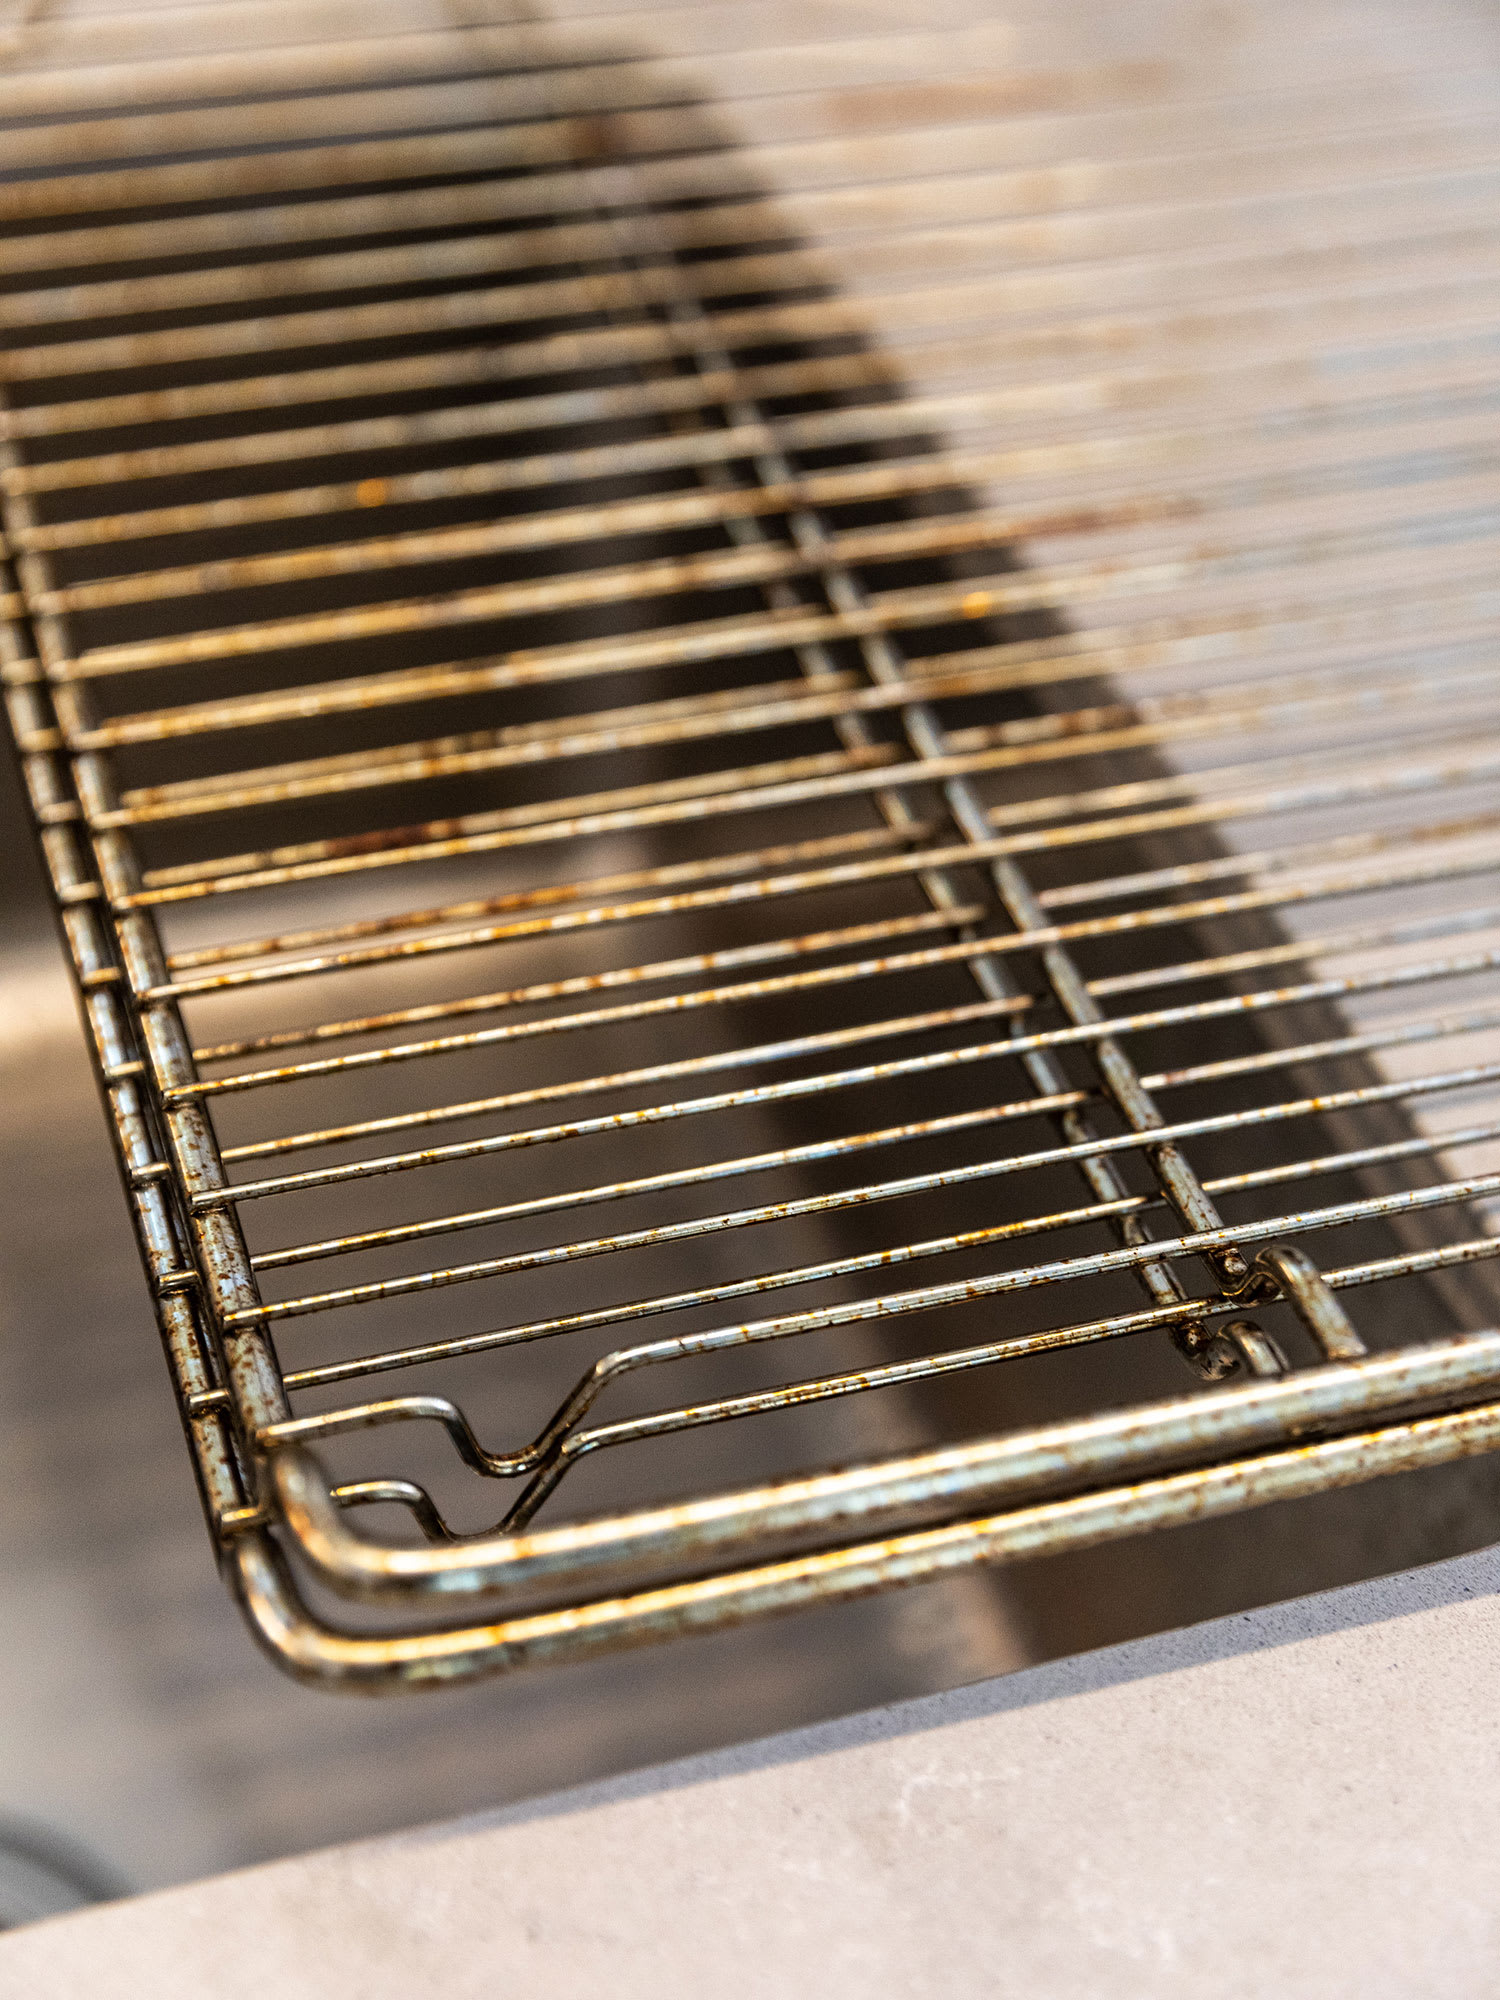 clean oven racks with ammonia